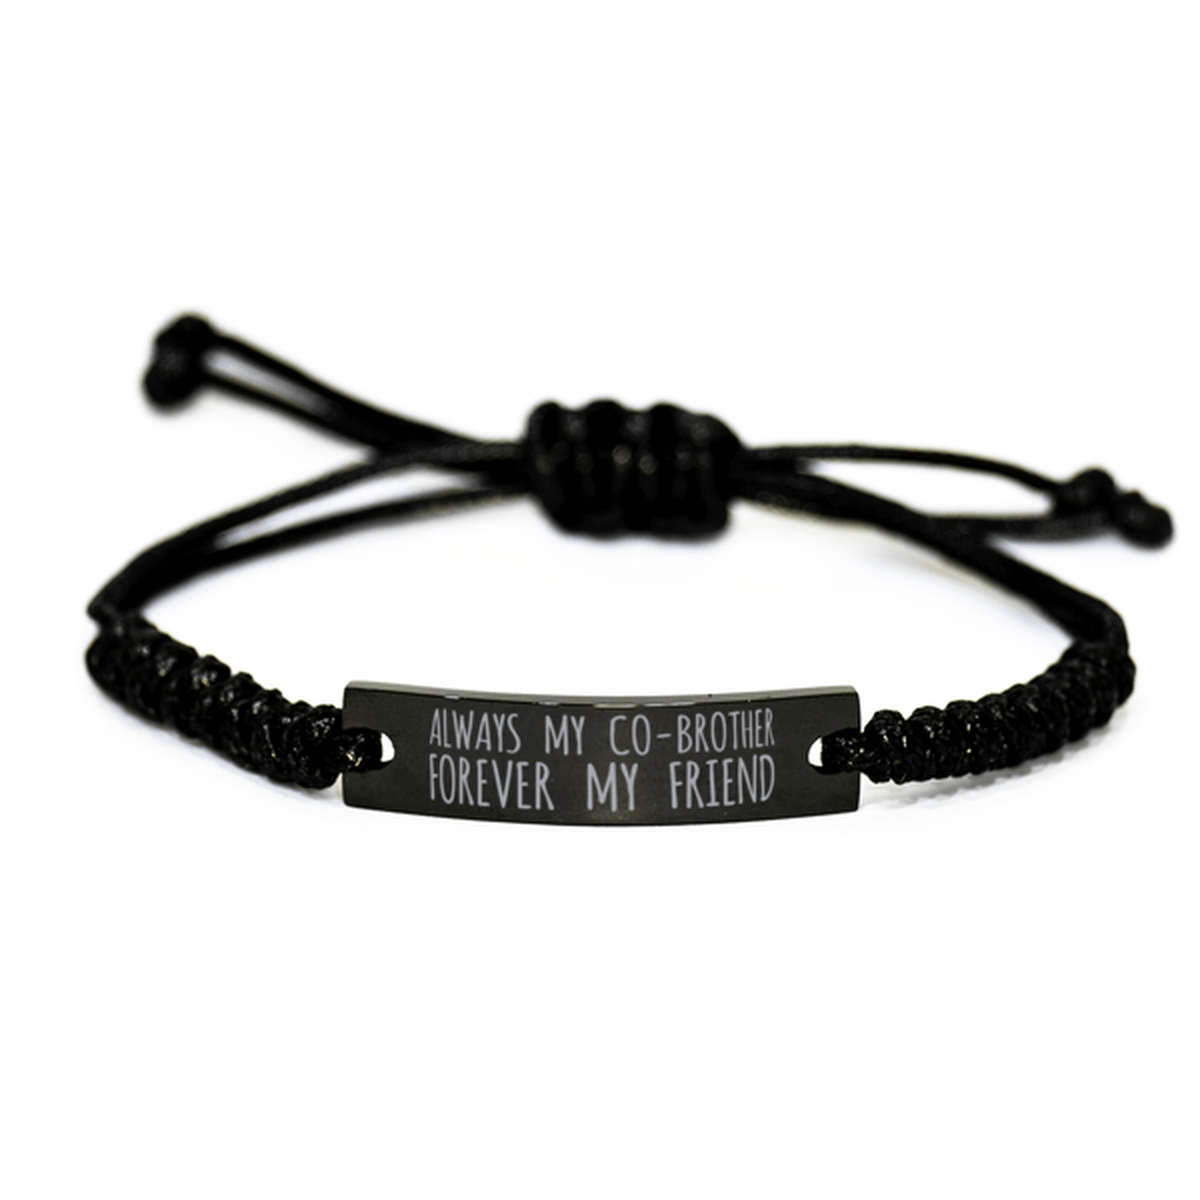 Inspirational Co-Brother Black Rope Bracelet, Always My Co-Brother Forever My Friend, Best Birthday Gifts For Family